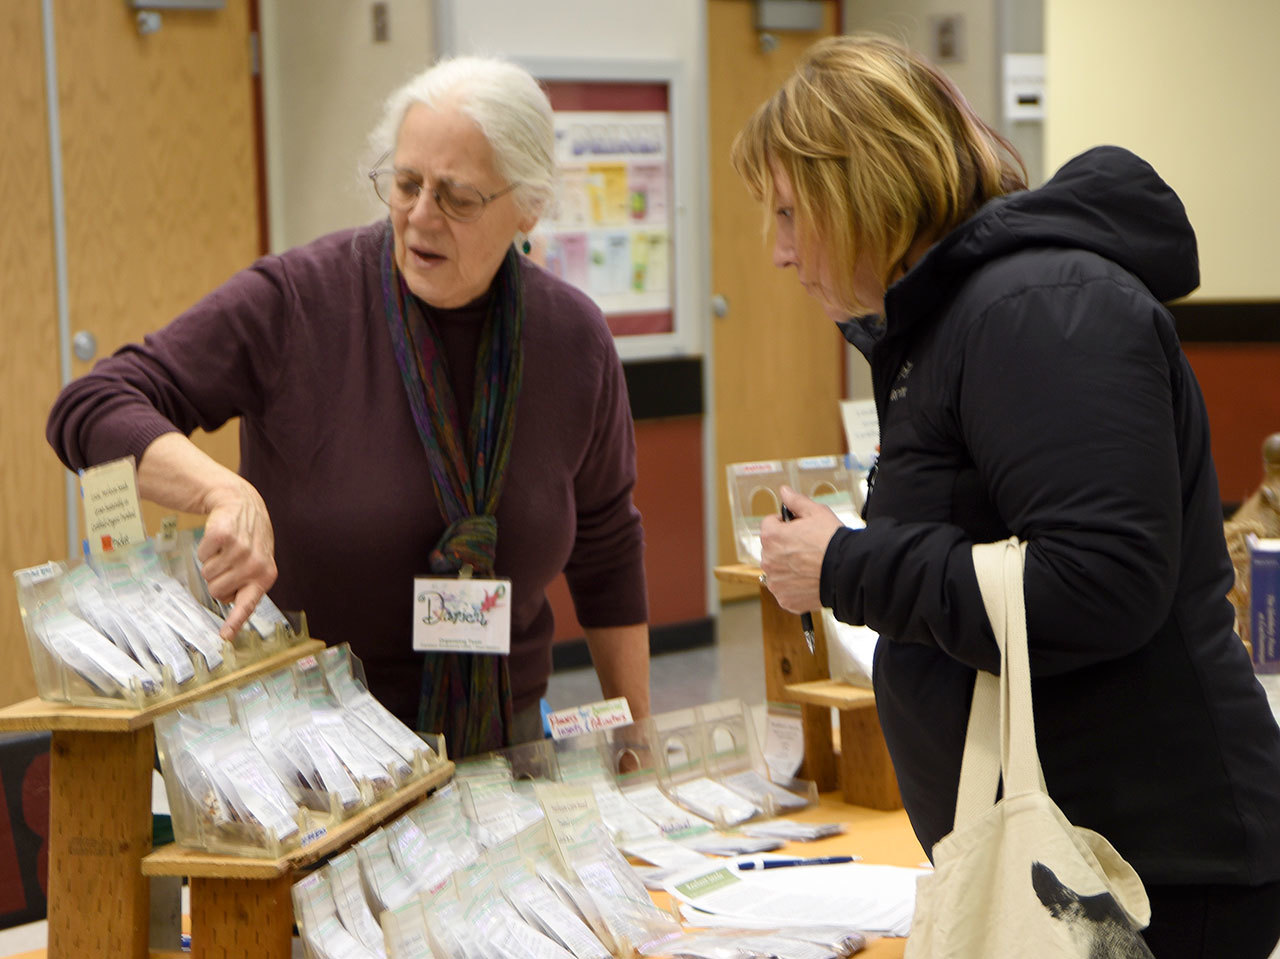 Darien Payne discusses various seeds with a participant in the 2017 Snoqualmie Valley Seed Exchange. The event returns to Cedarcrest High School Feb. 10.